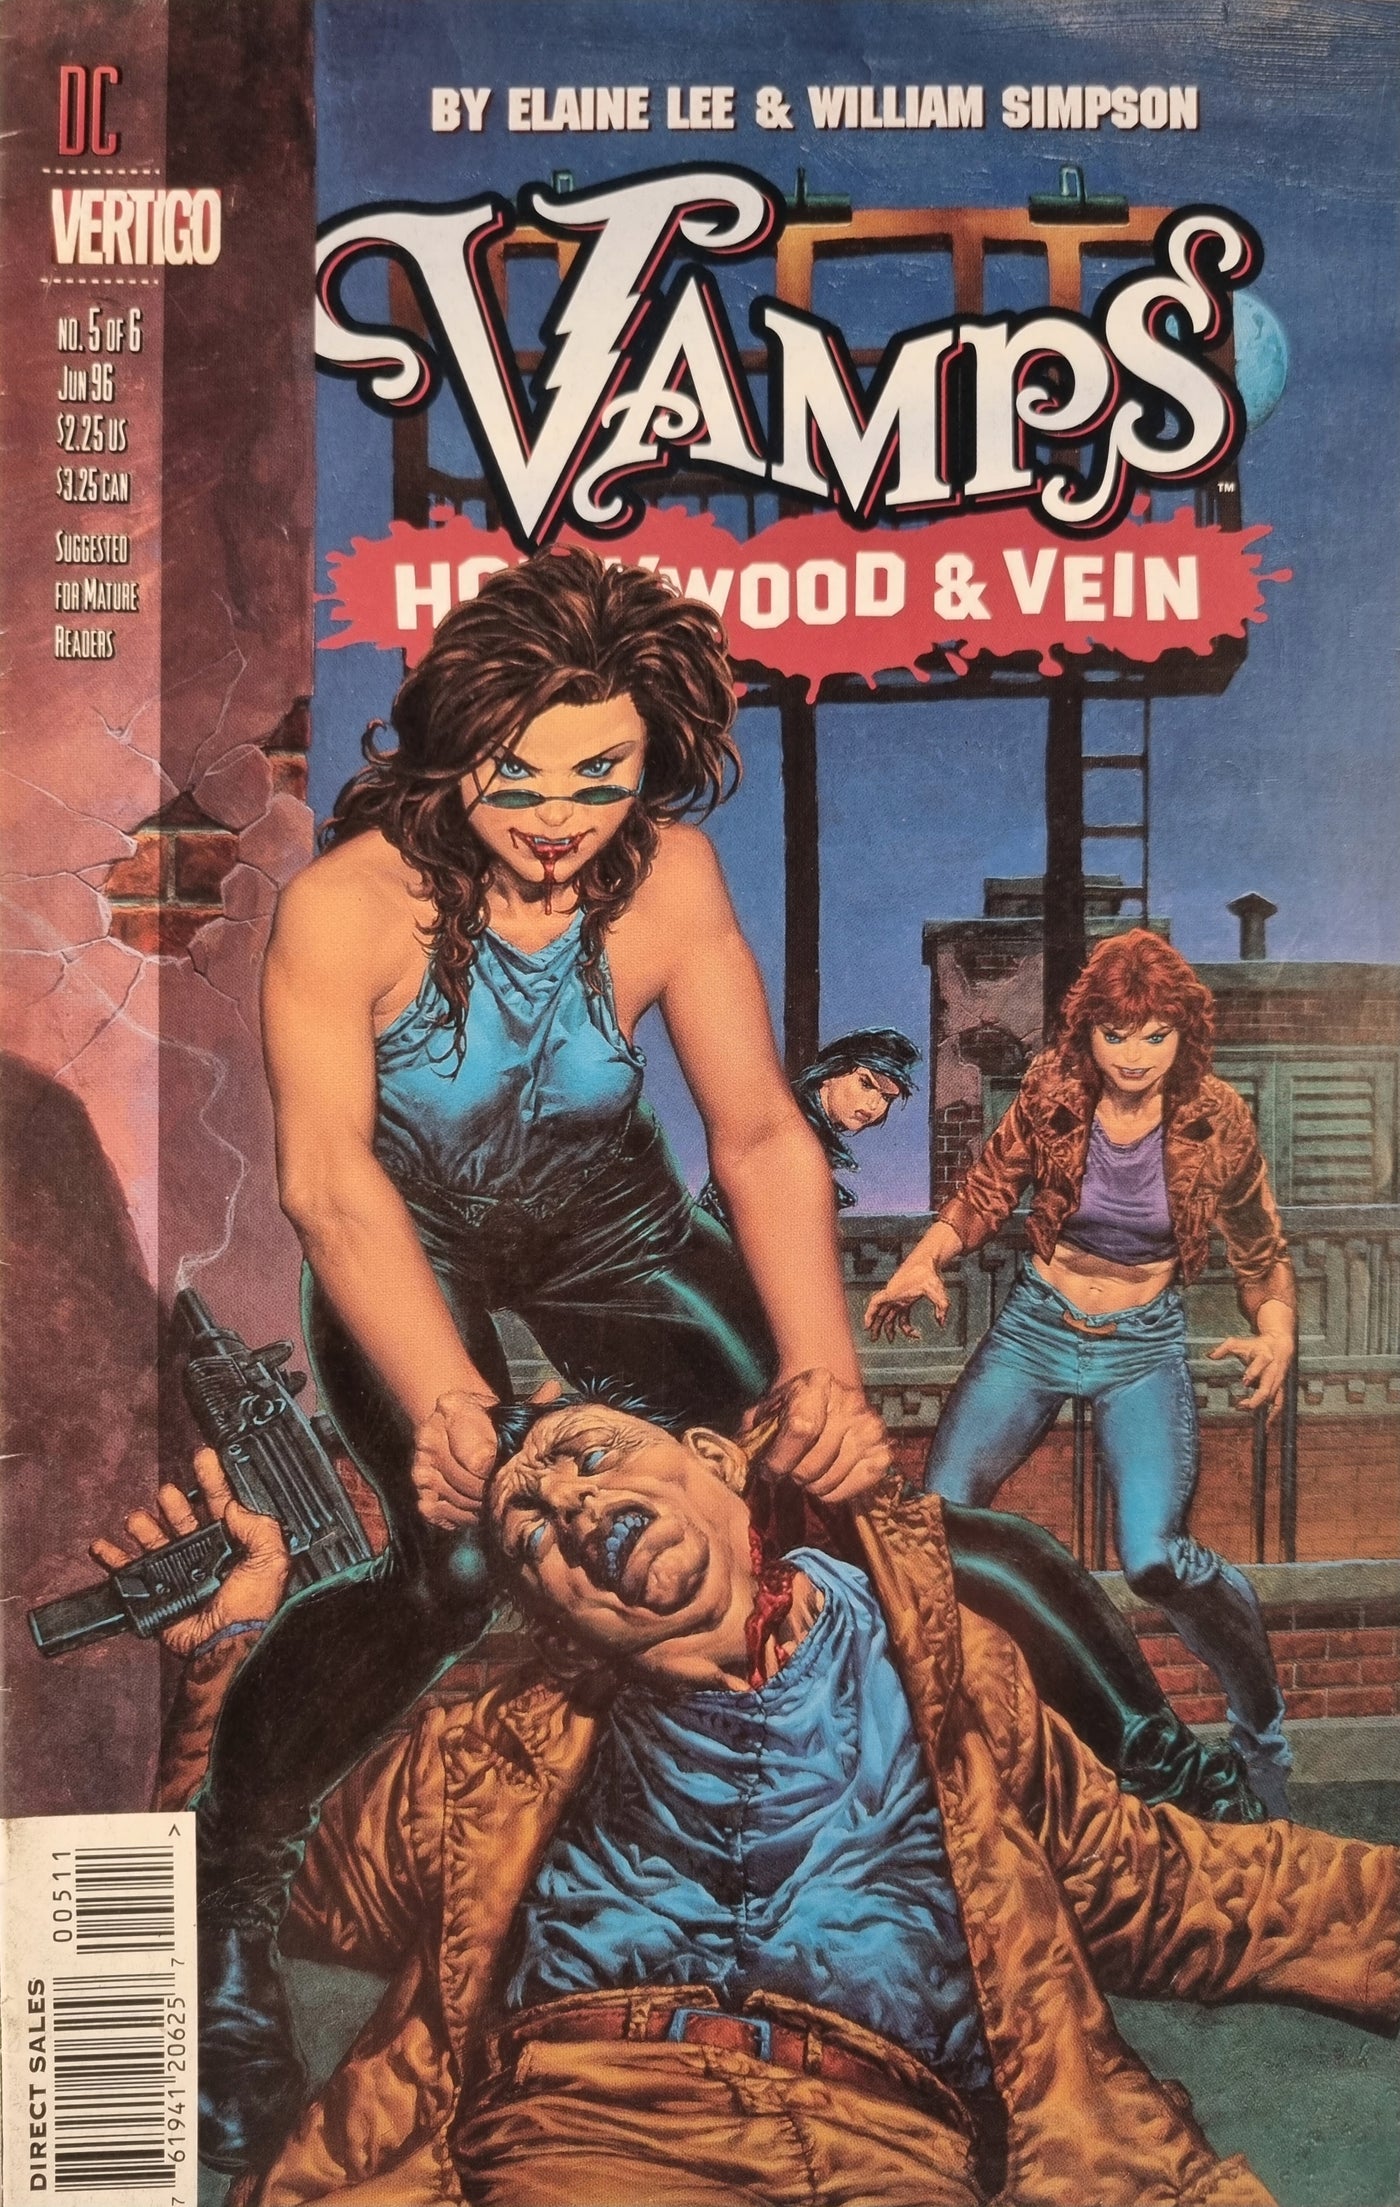 Vamps: Hollywood & Vein #5 (of 6)